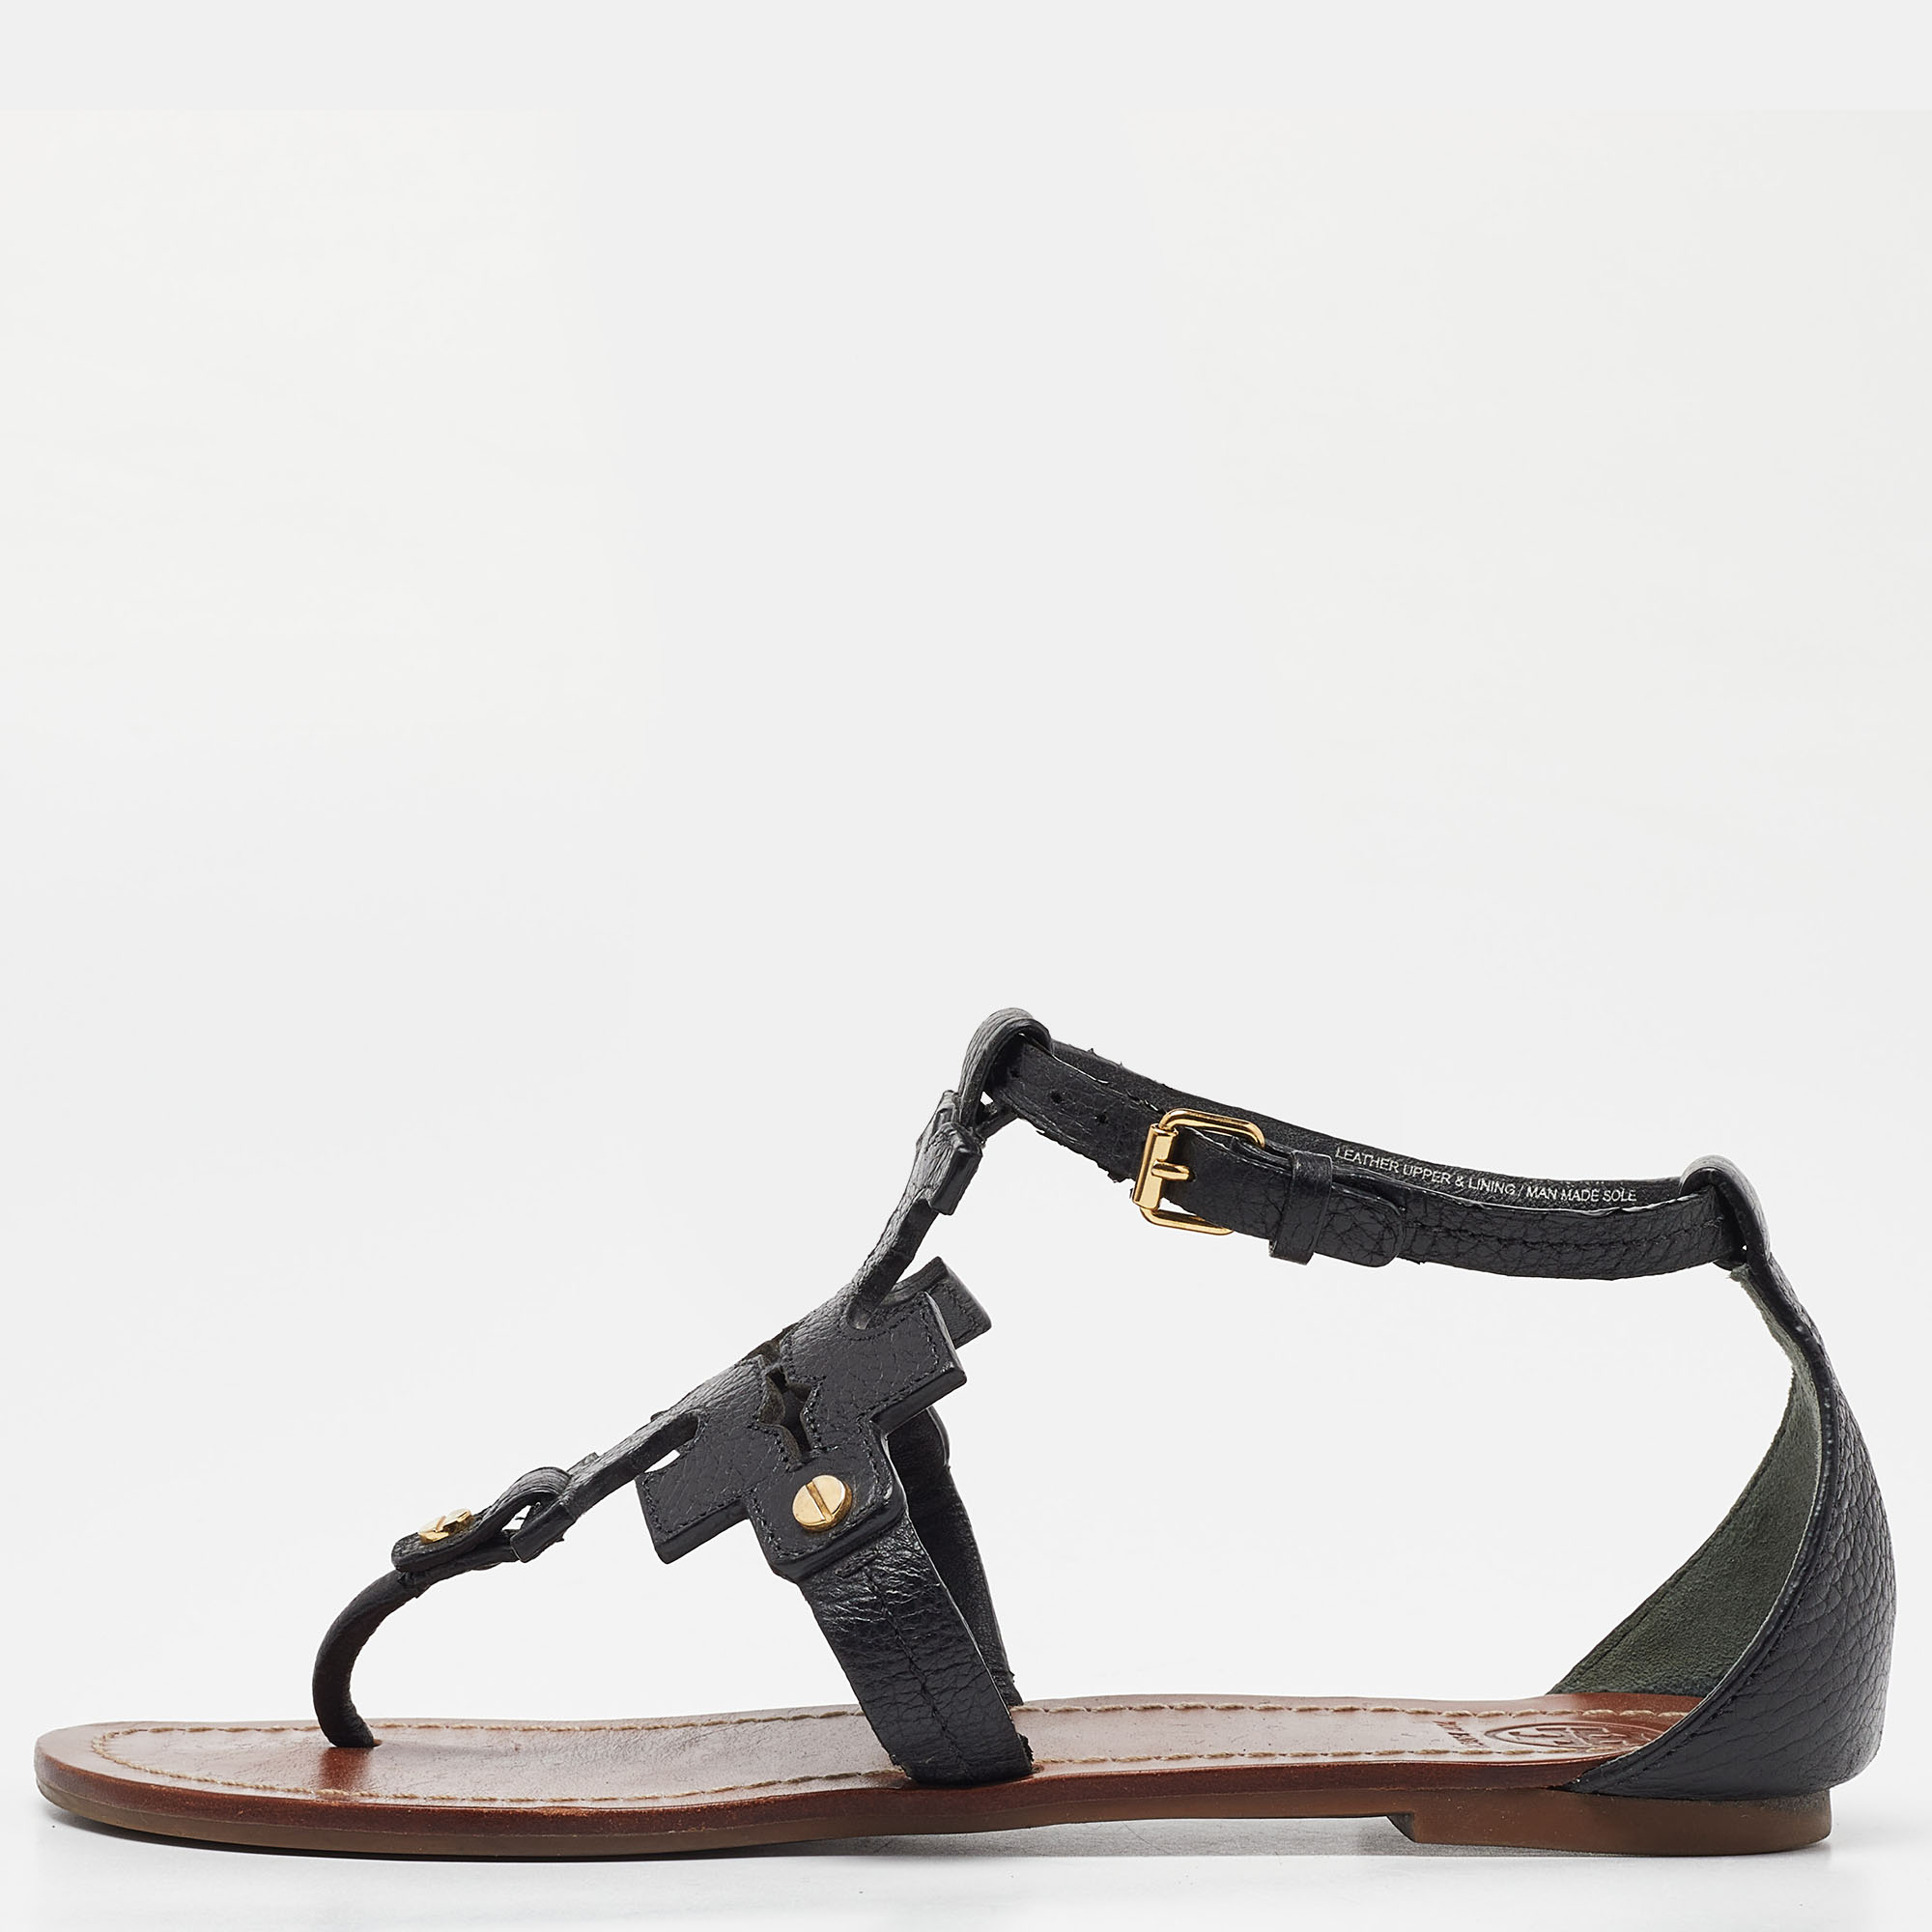 Tory Burch Black Leather Phoebe Flat Sandals Size 37.5